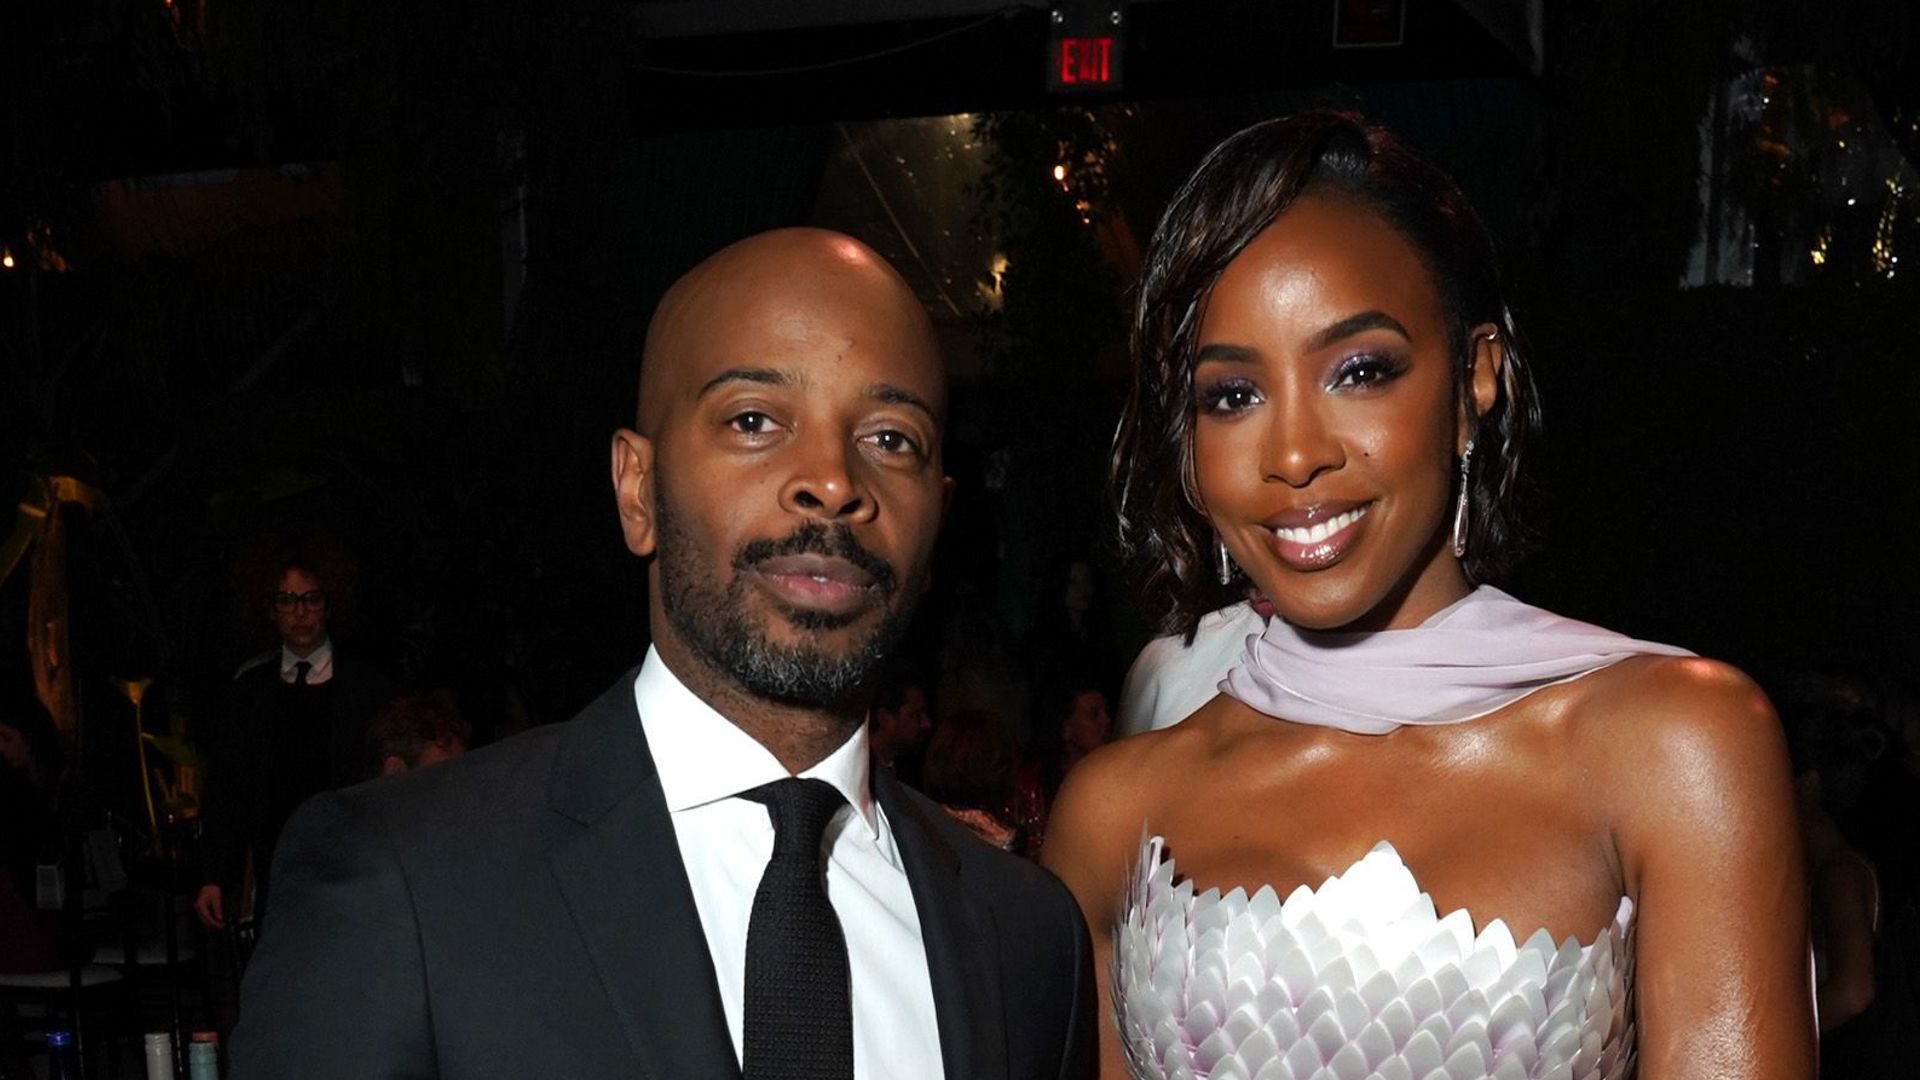 Tim Weatherspoon and Kelly Rowland attend the 2022 Baby2Baby Gala on November 12, 2022 in West Hollywood, California